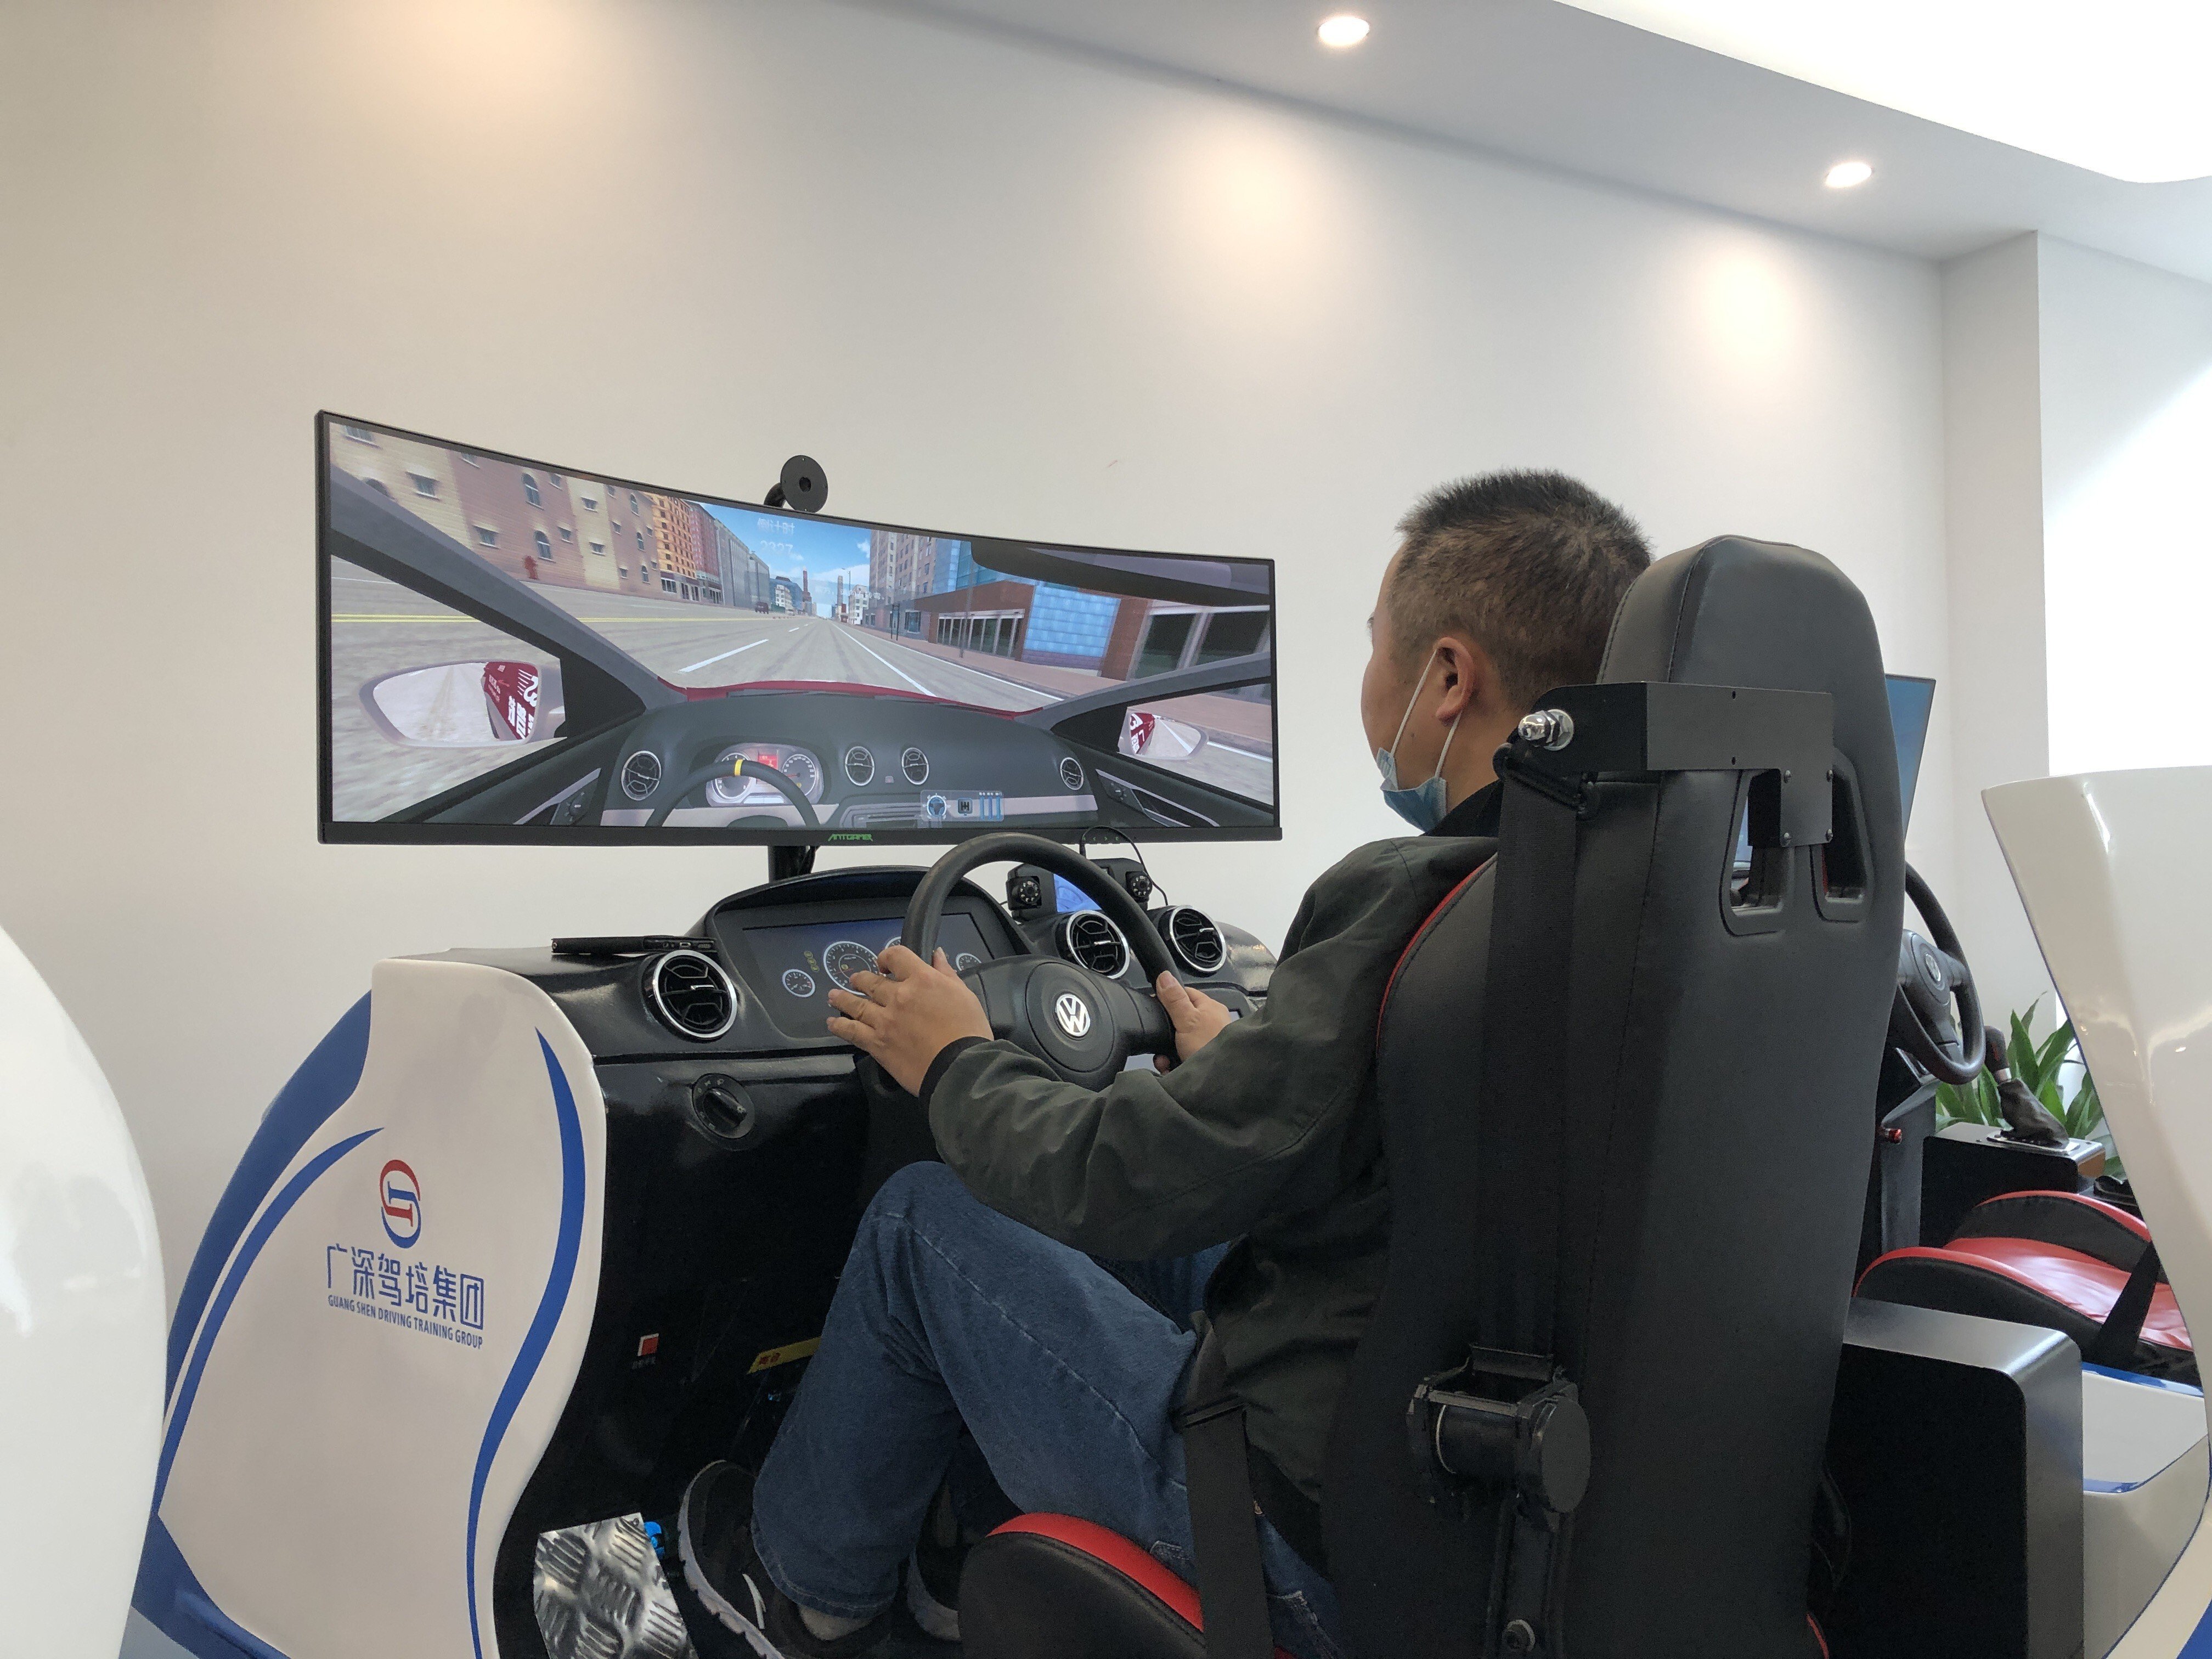 Everyone should learn to drive in a simulator